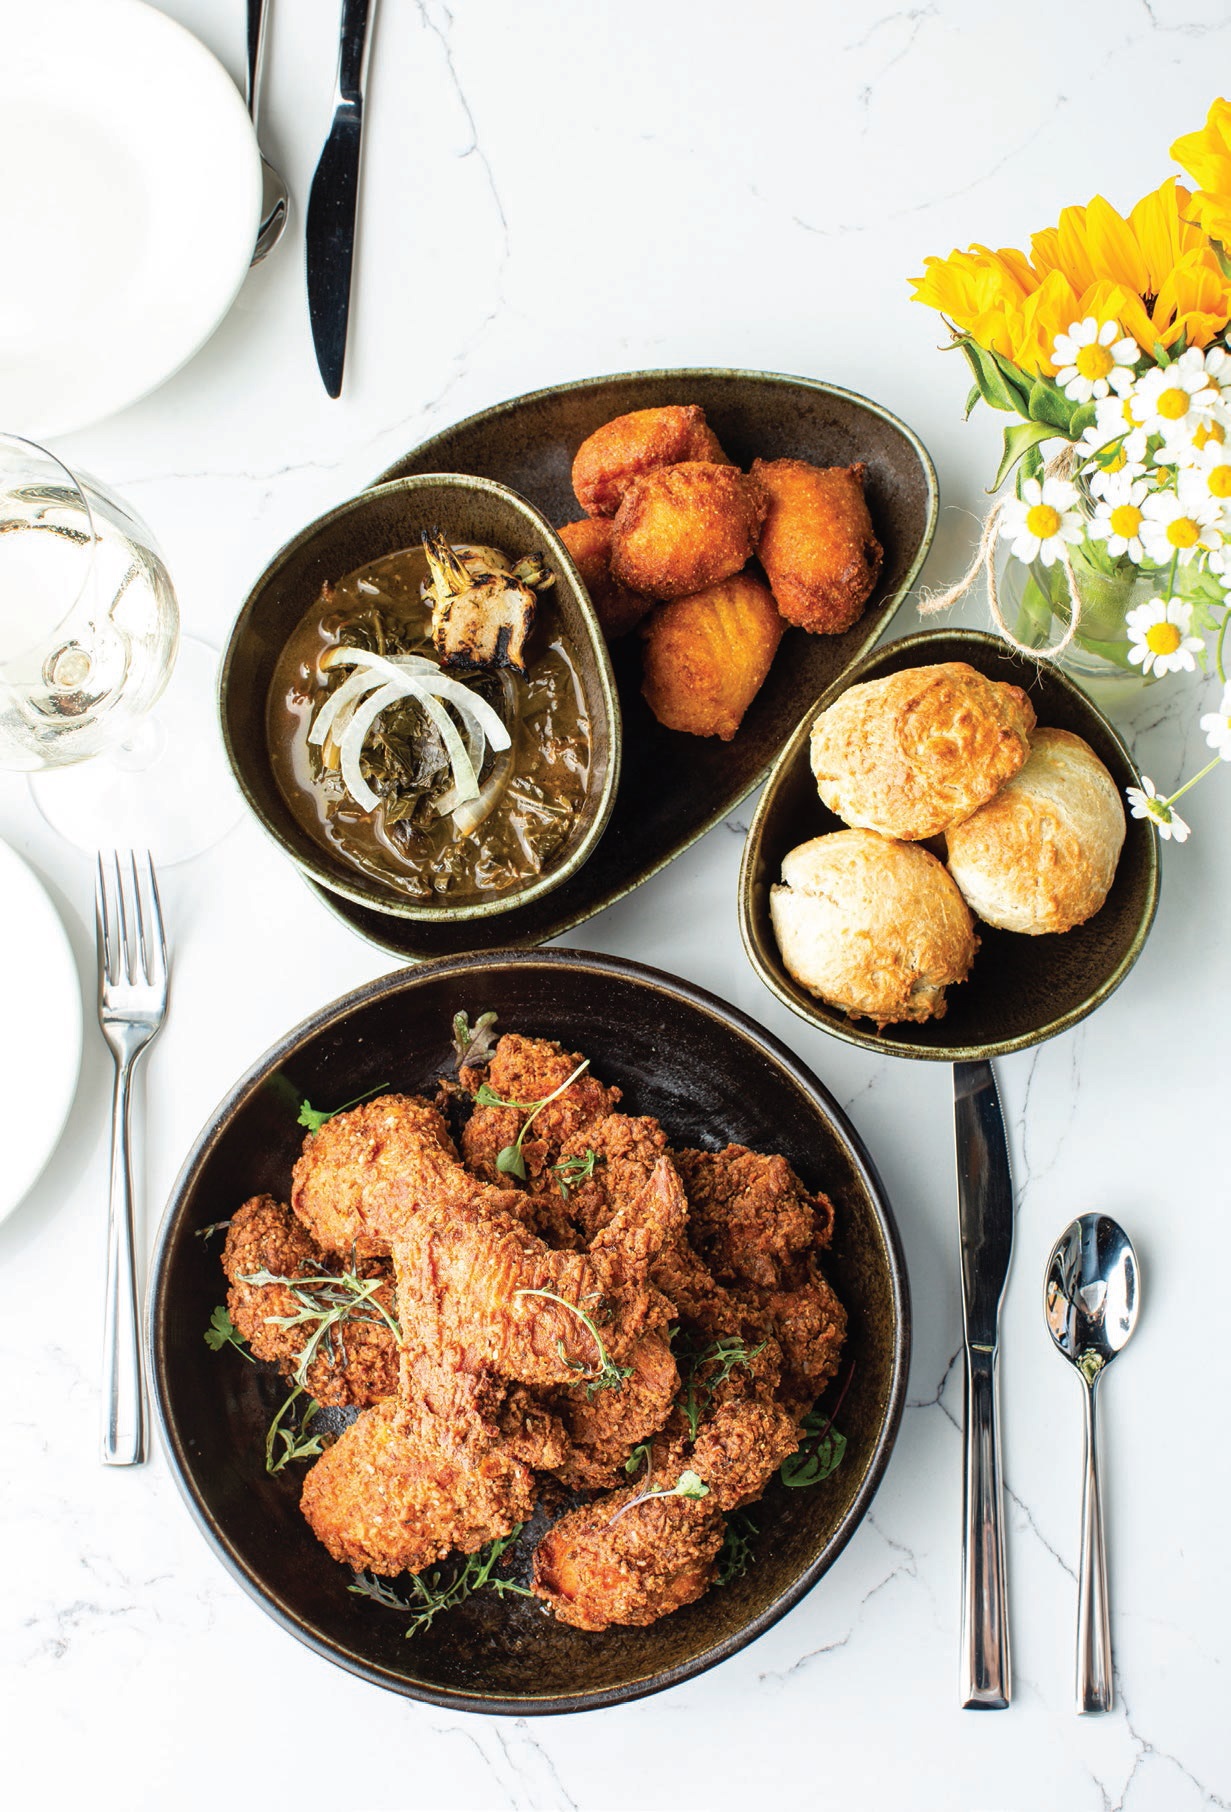 Duck fatfried chicken with Southern greens at Roots Southern Table. PHOTO BY ALYSSA VINCENT